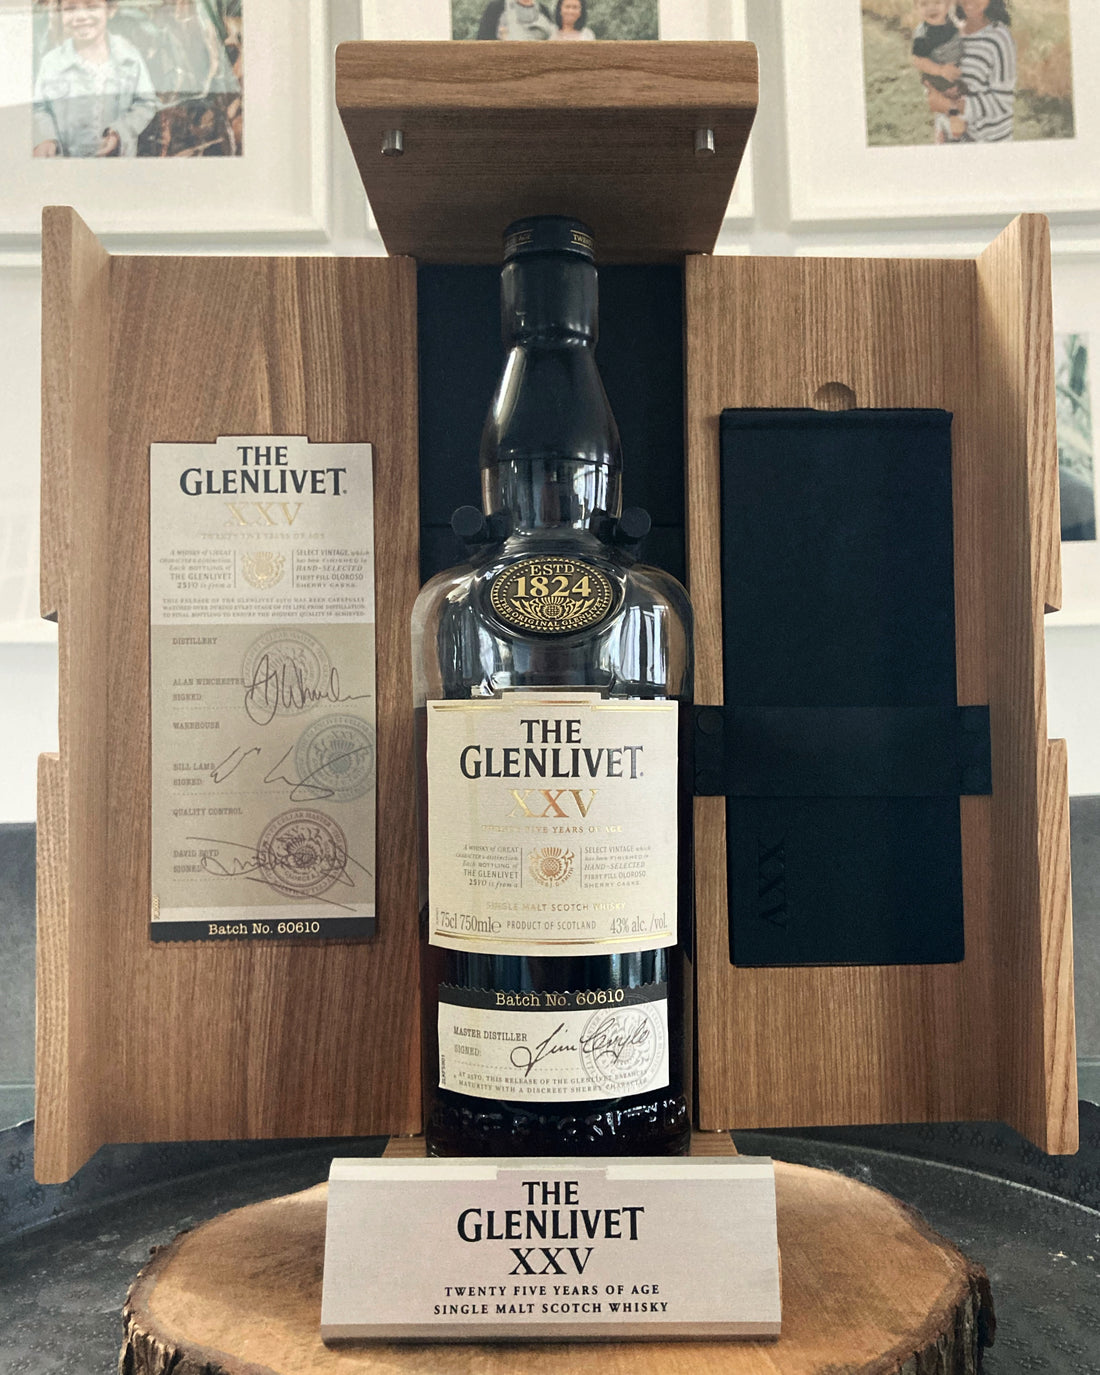 The Glenlivet is the whisky that started it all for me!